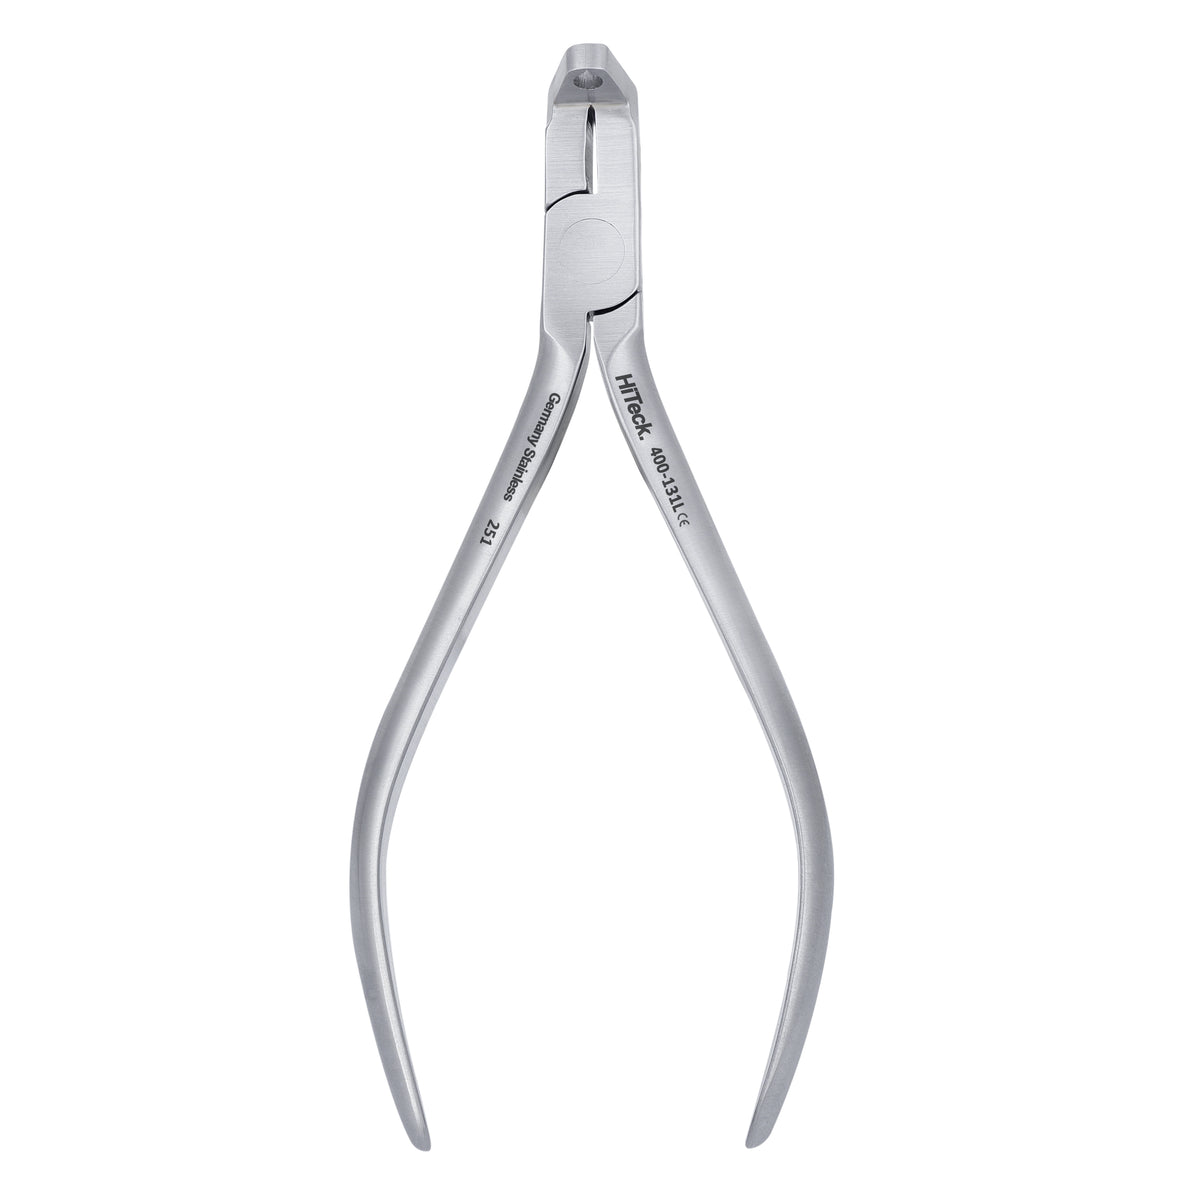 Angulated Bracket Removing Pliers - HiTeck Medical Instruments